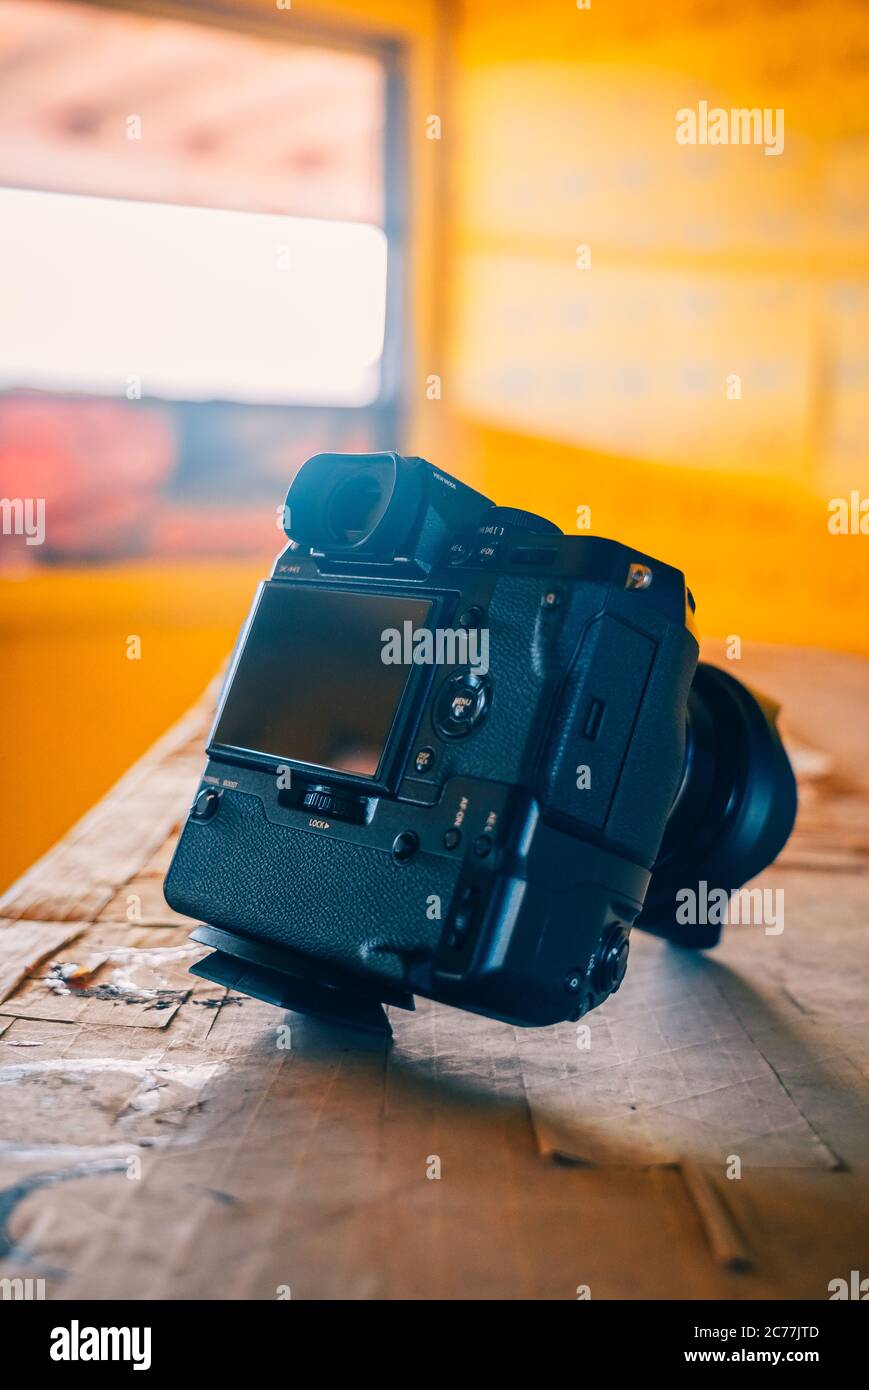 Black DSLR camera on a wooden table. Stock Photo